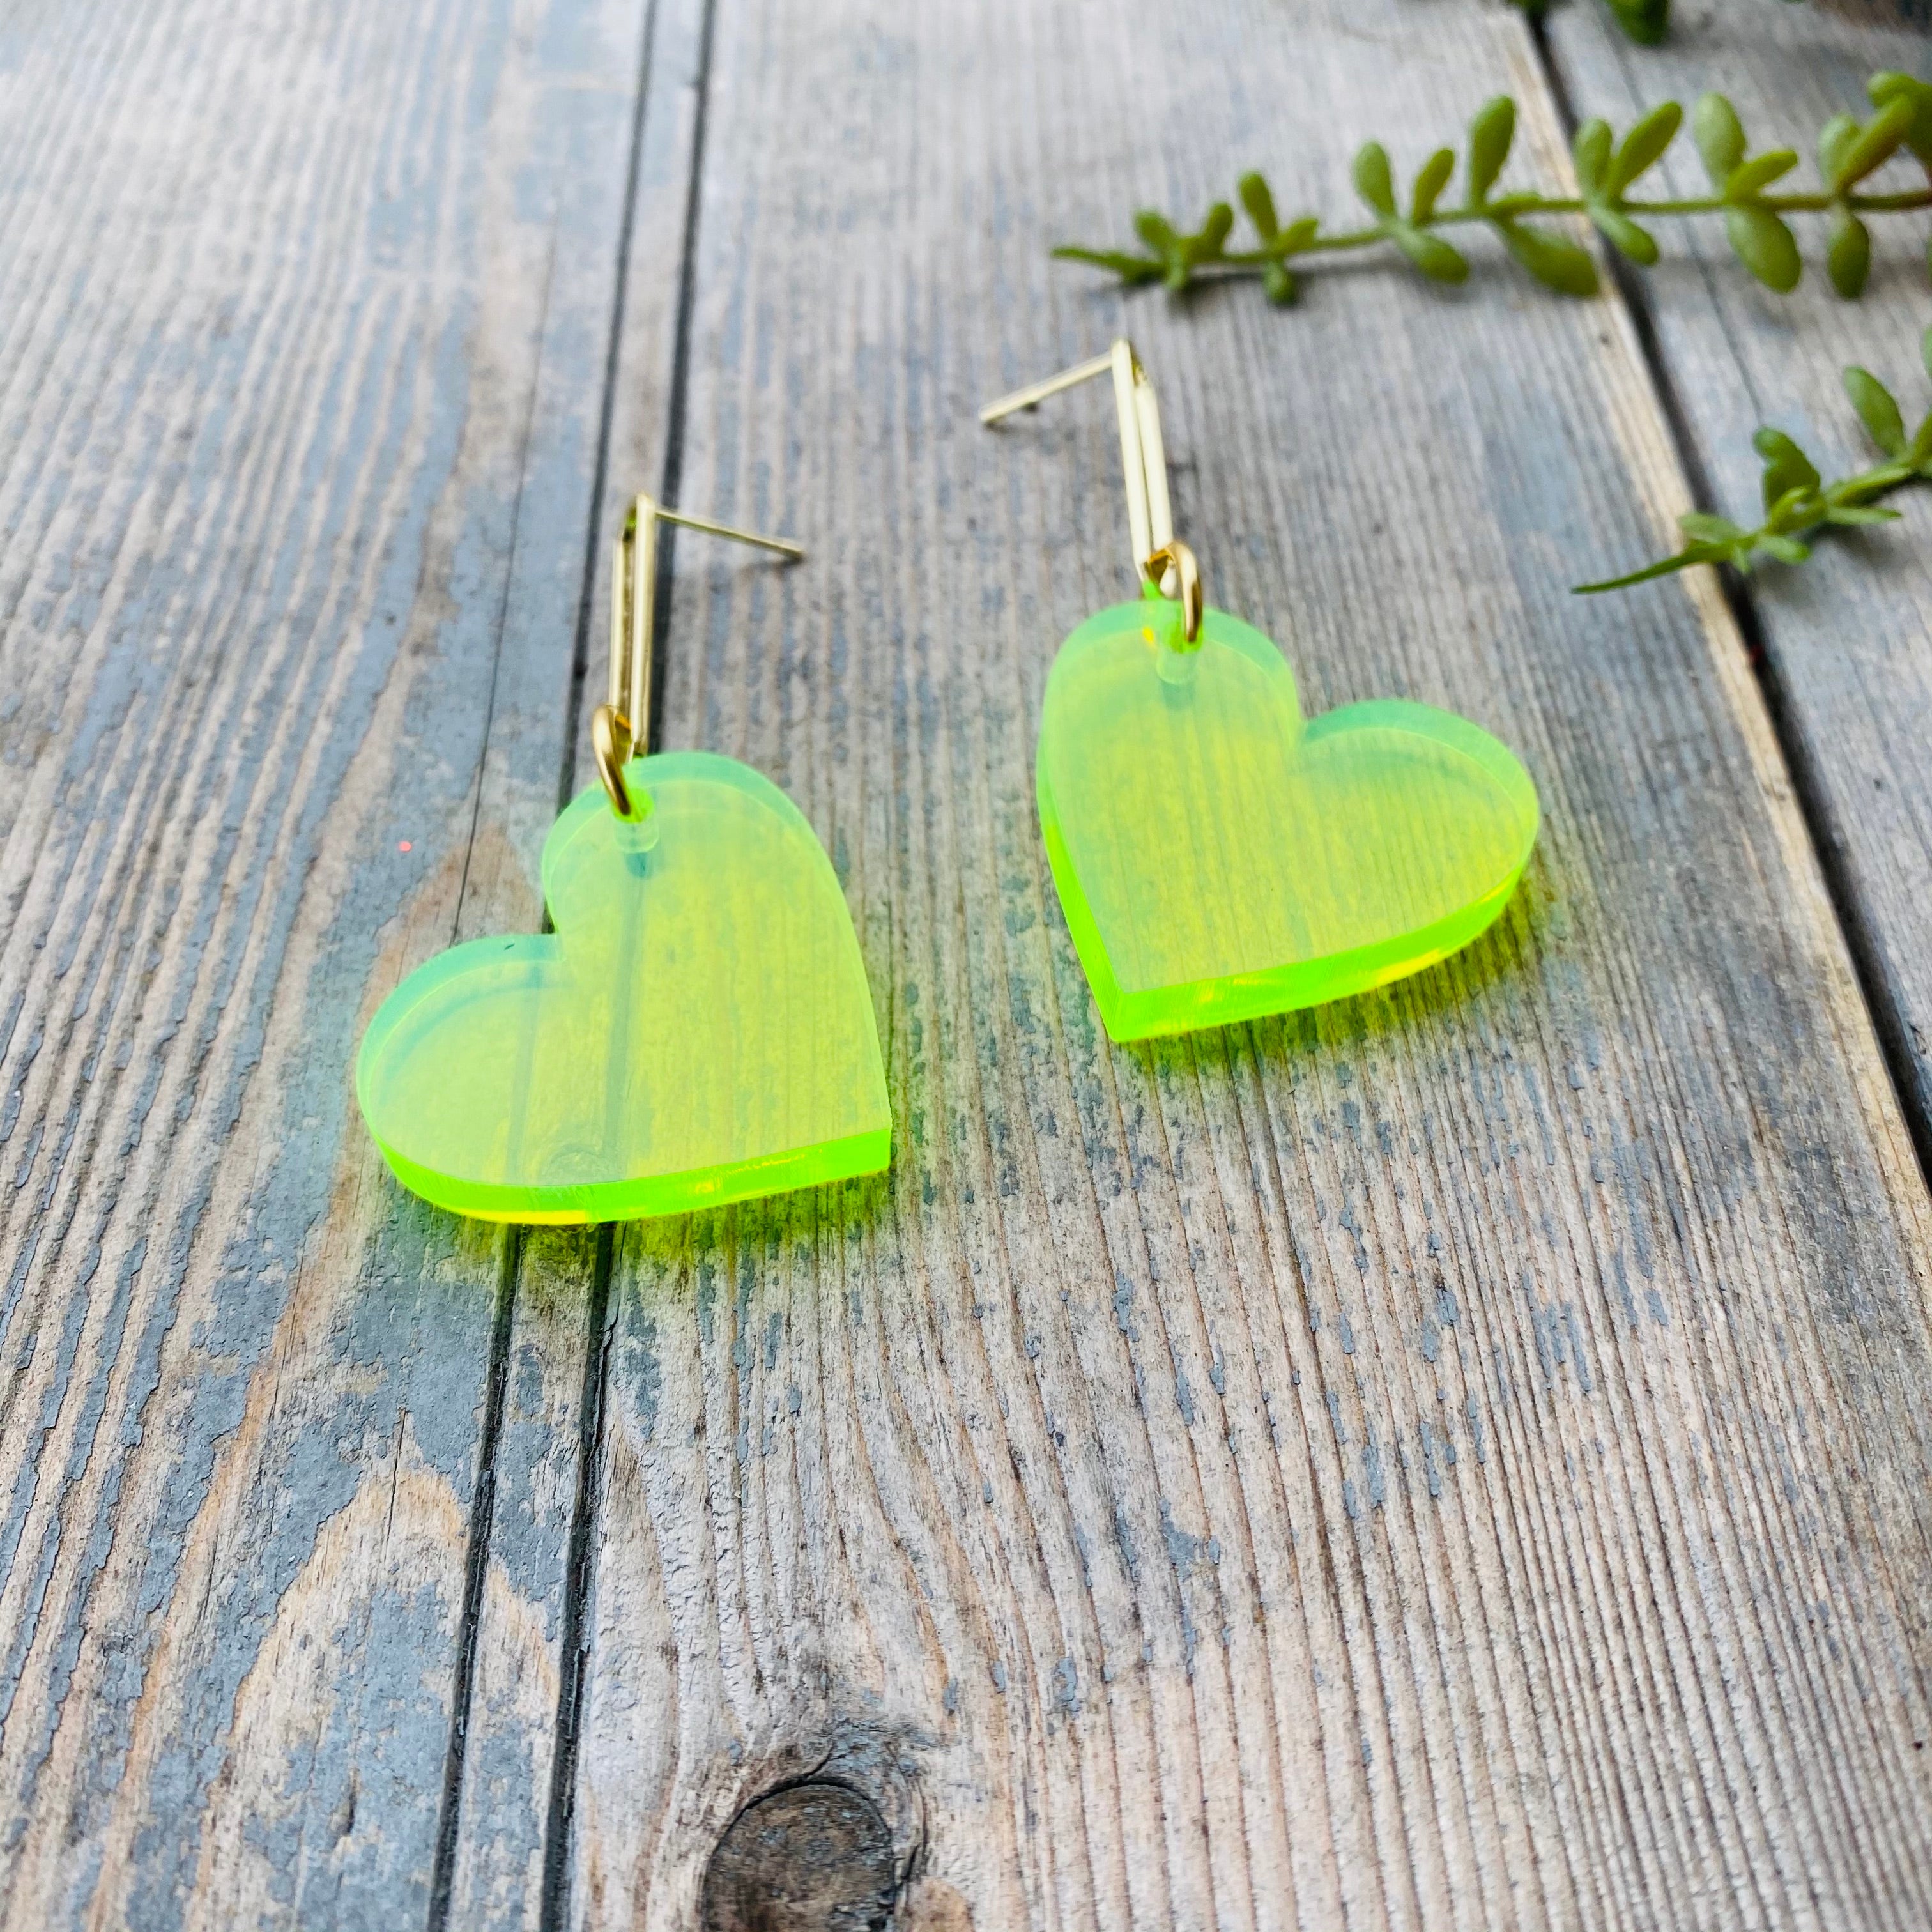 neon green and pink hearts